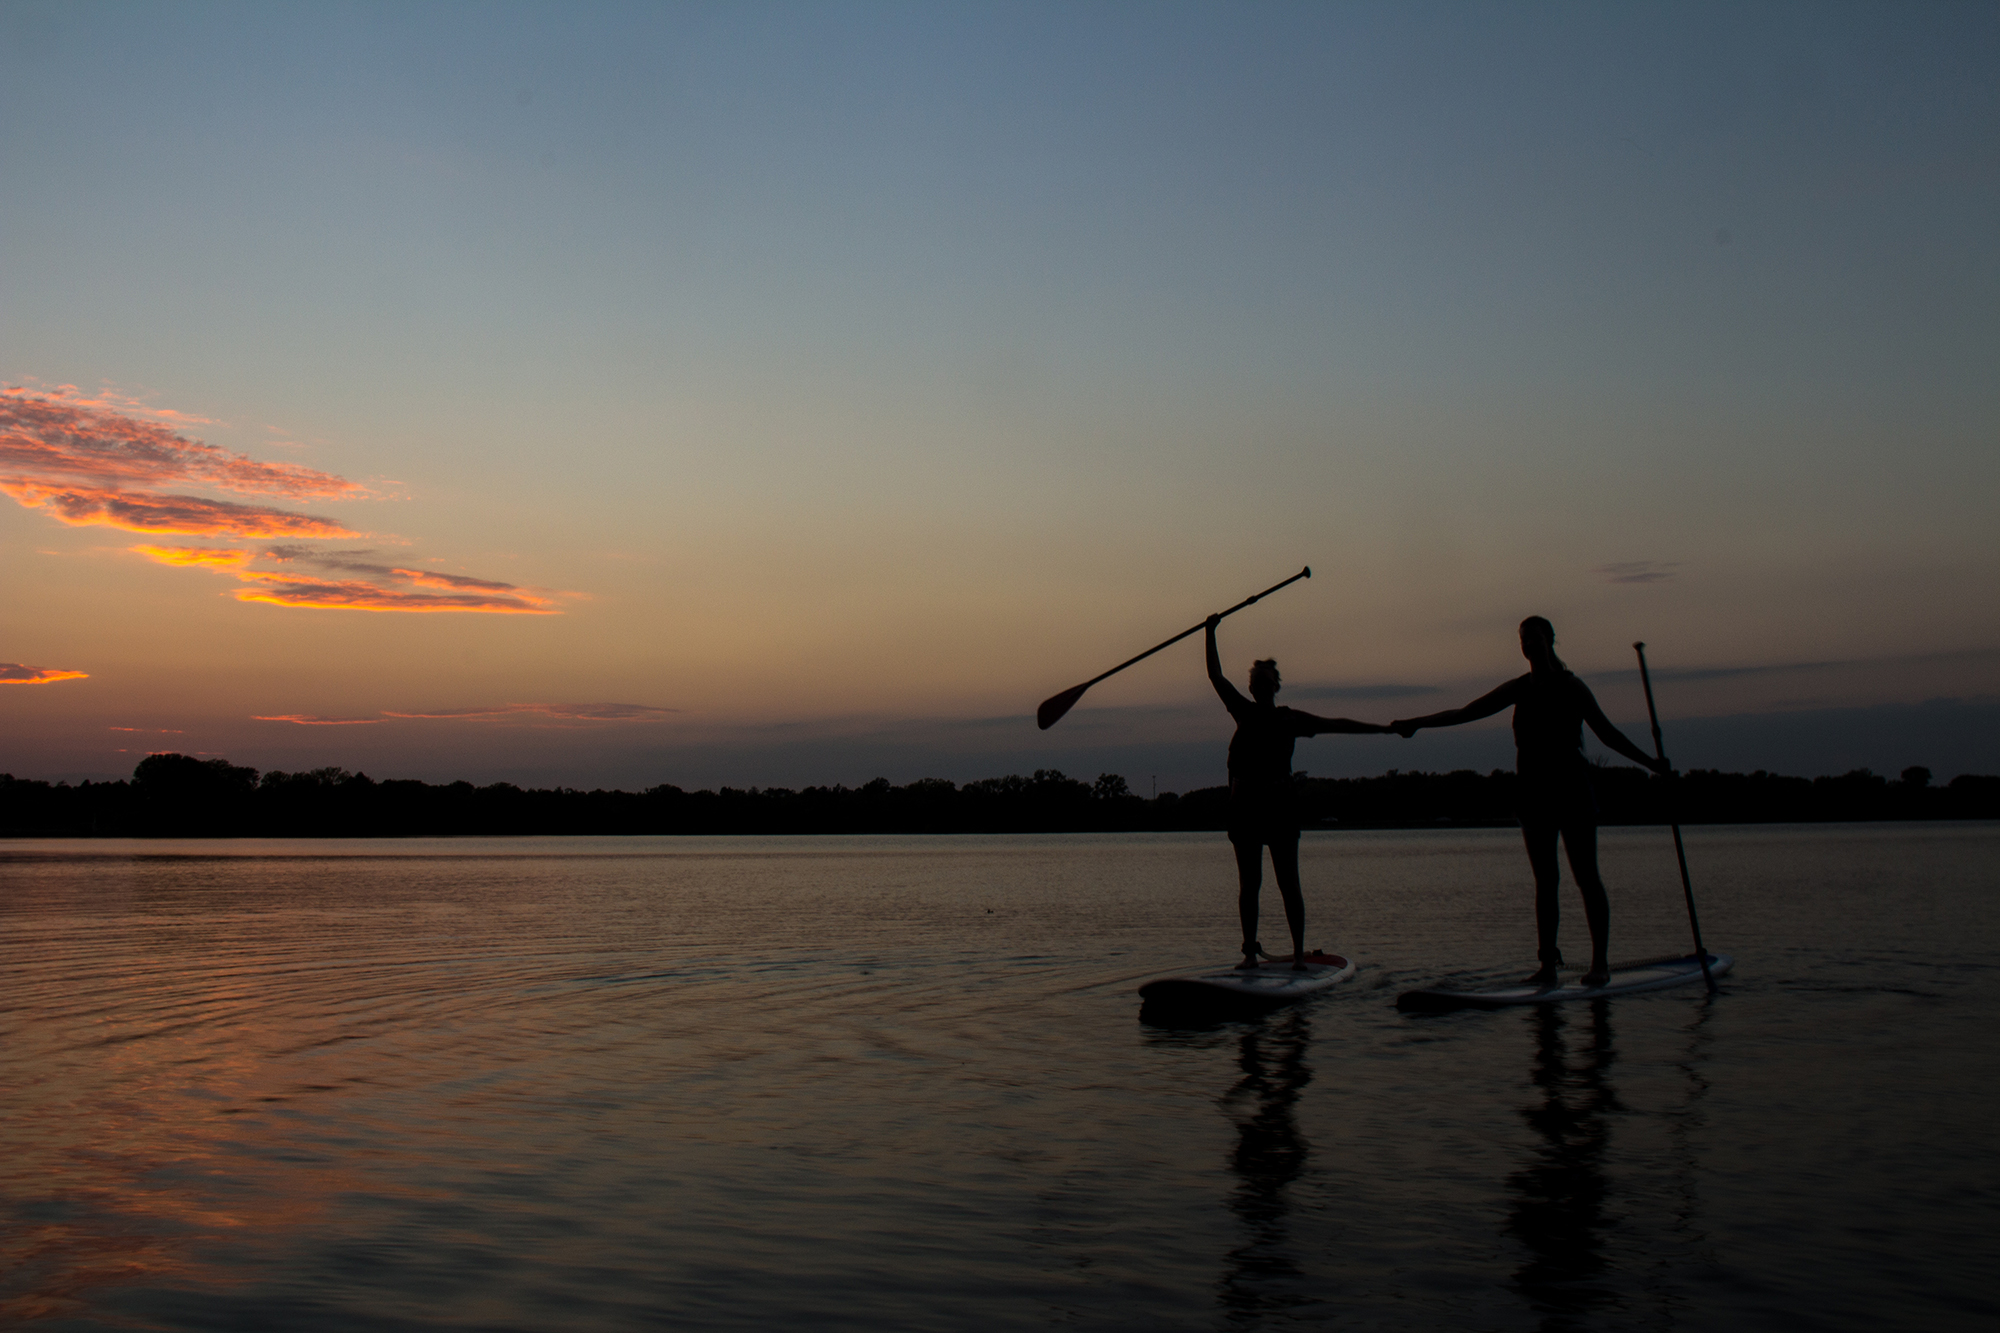 Evening Paddle will happen on both April 12 and April 26.